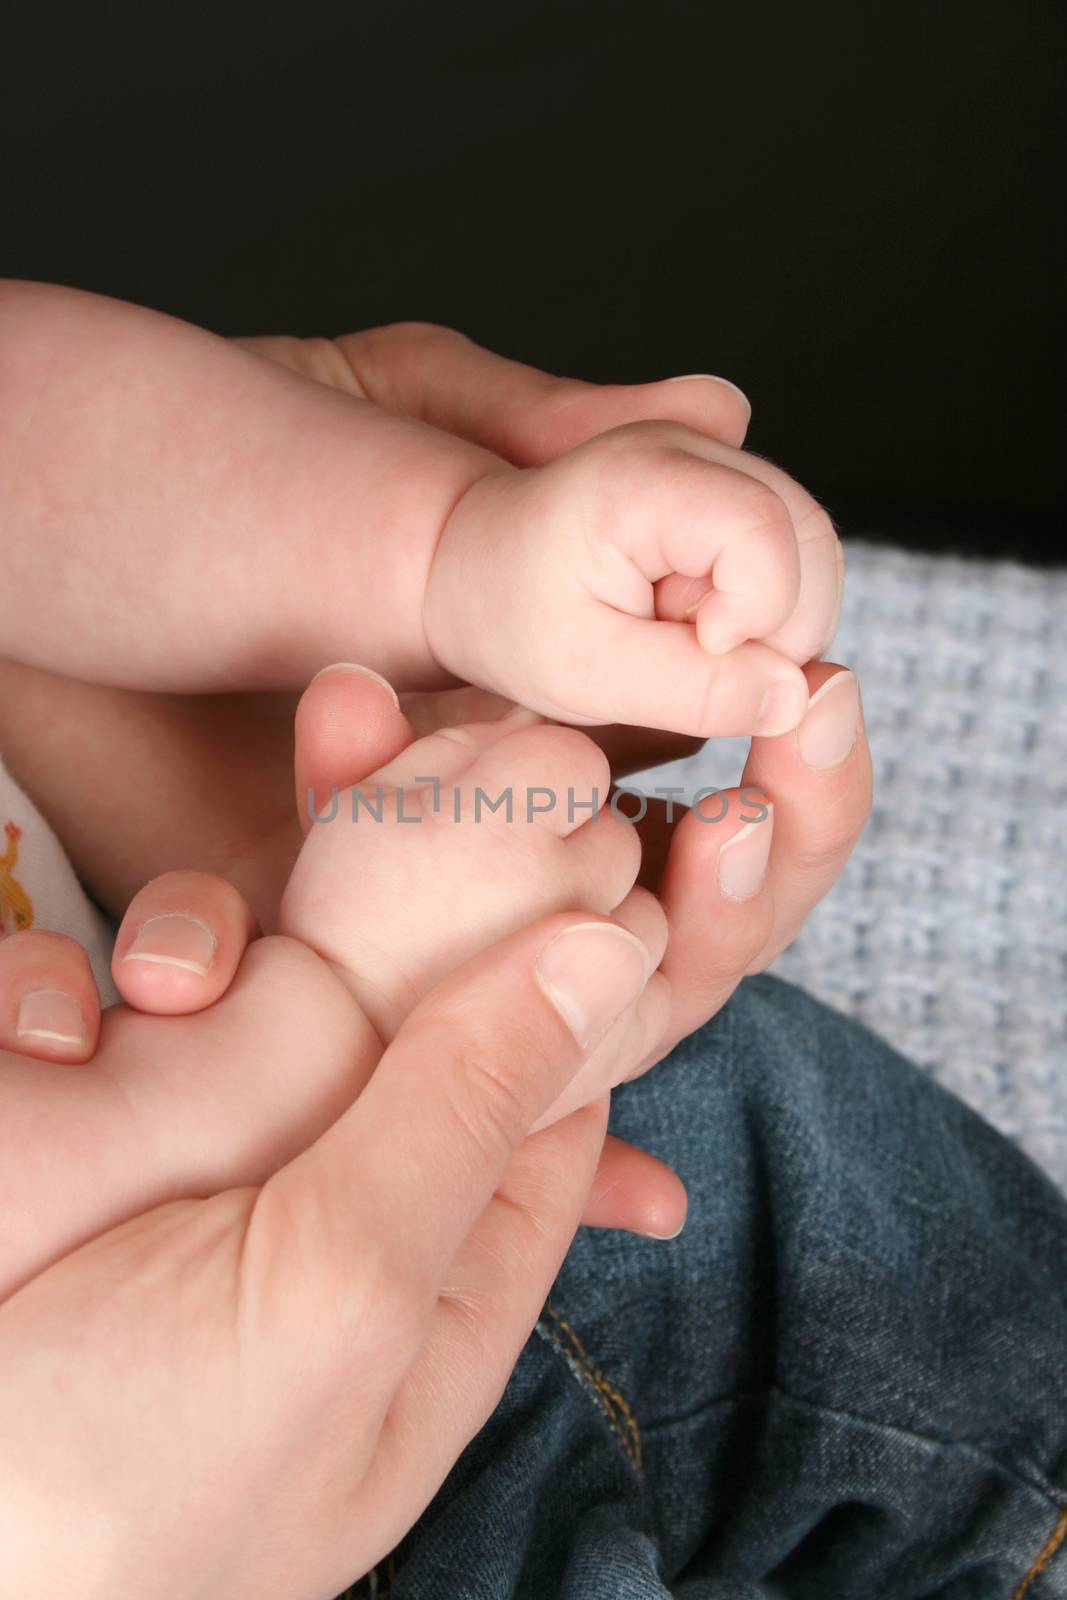 Hand of a baby in his mothers hand